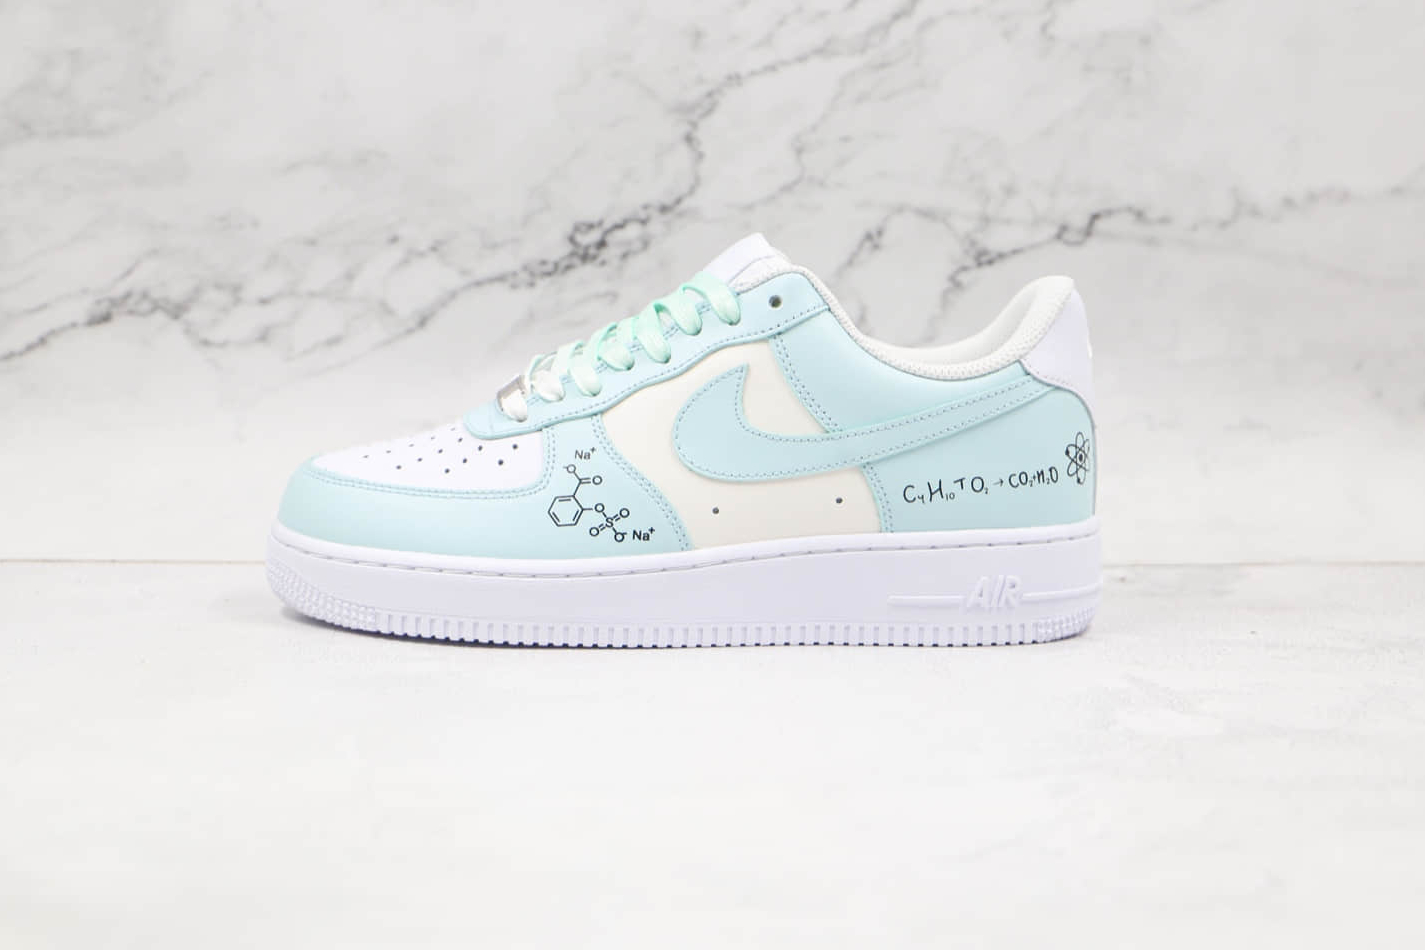 Nike Air Force 1 07 Low White Blue Black Shoes CW2288-303 - Stylish and Iconic Footwear